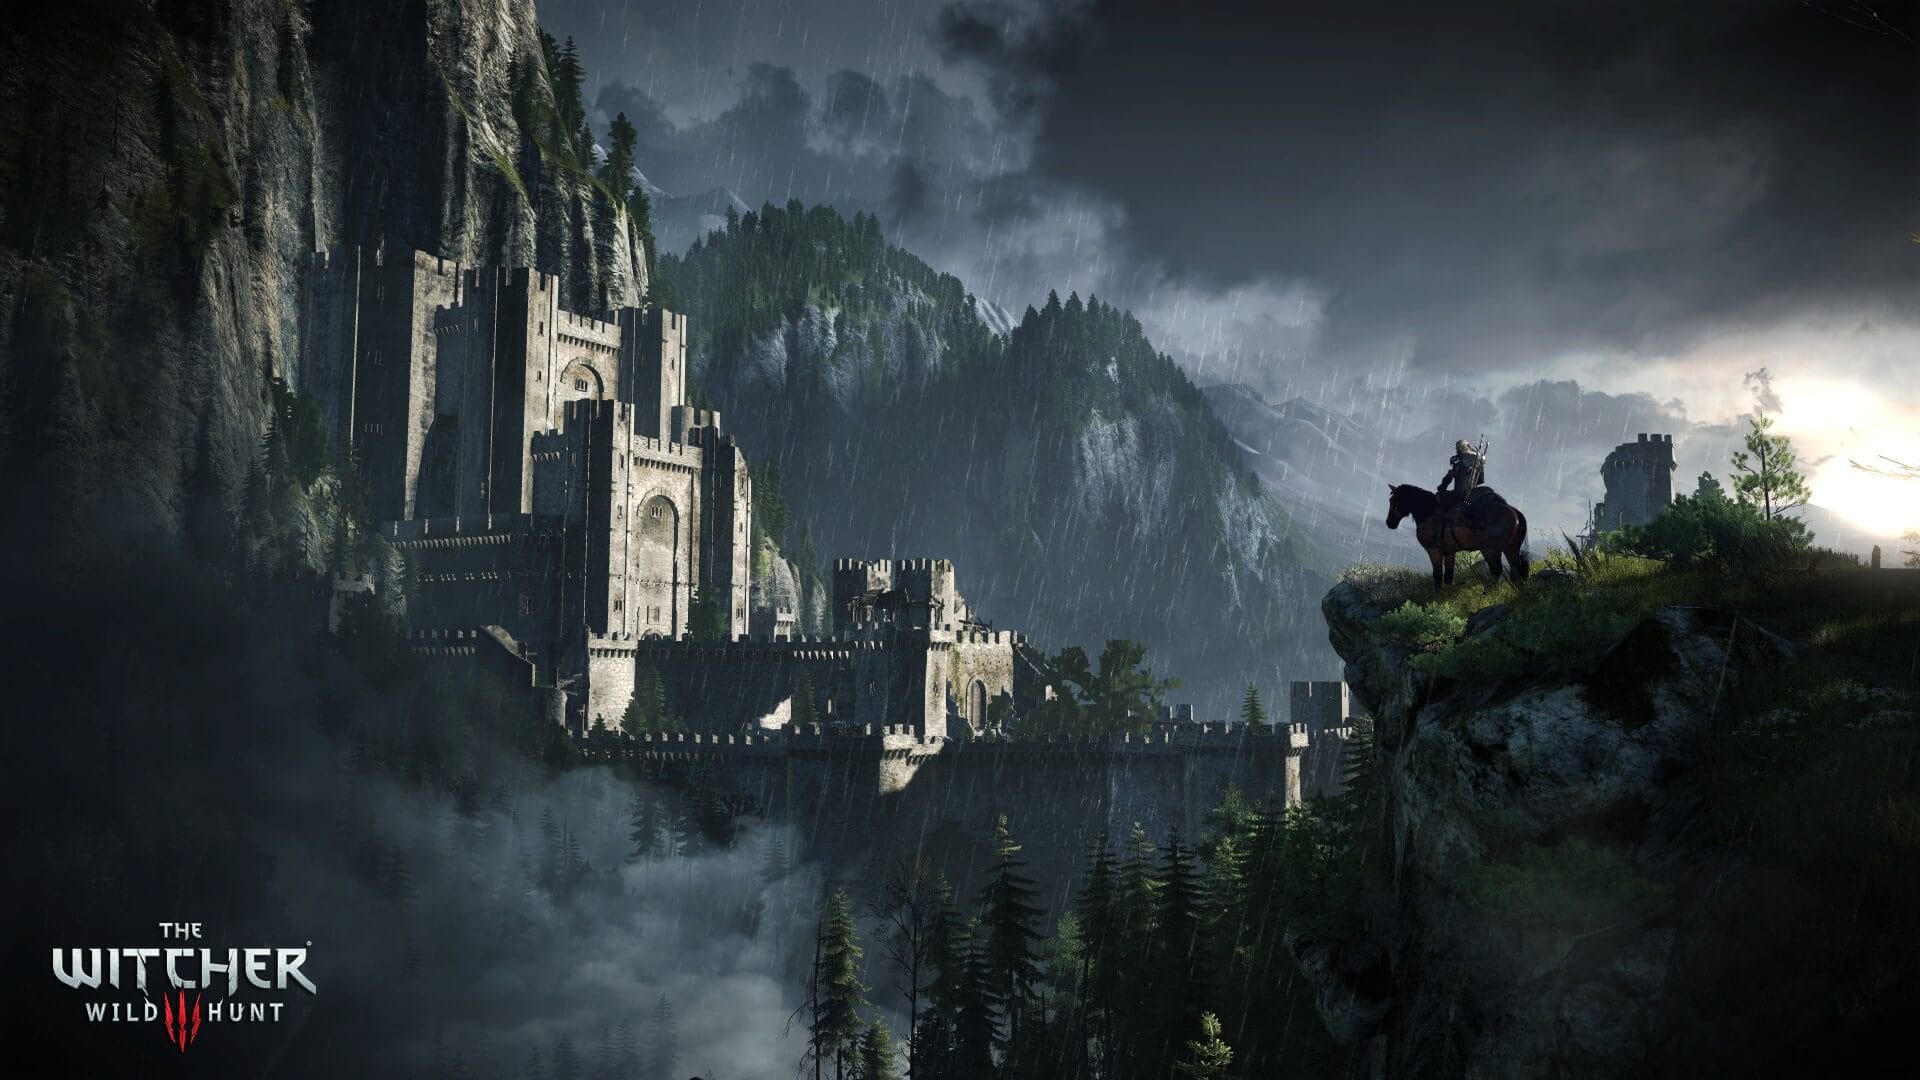 The Witcher 3: Wild Hunt Castle in the Forest Environment Screenshot